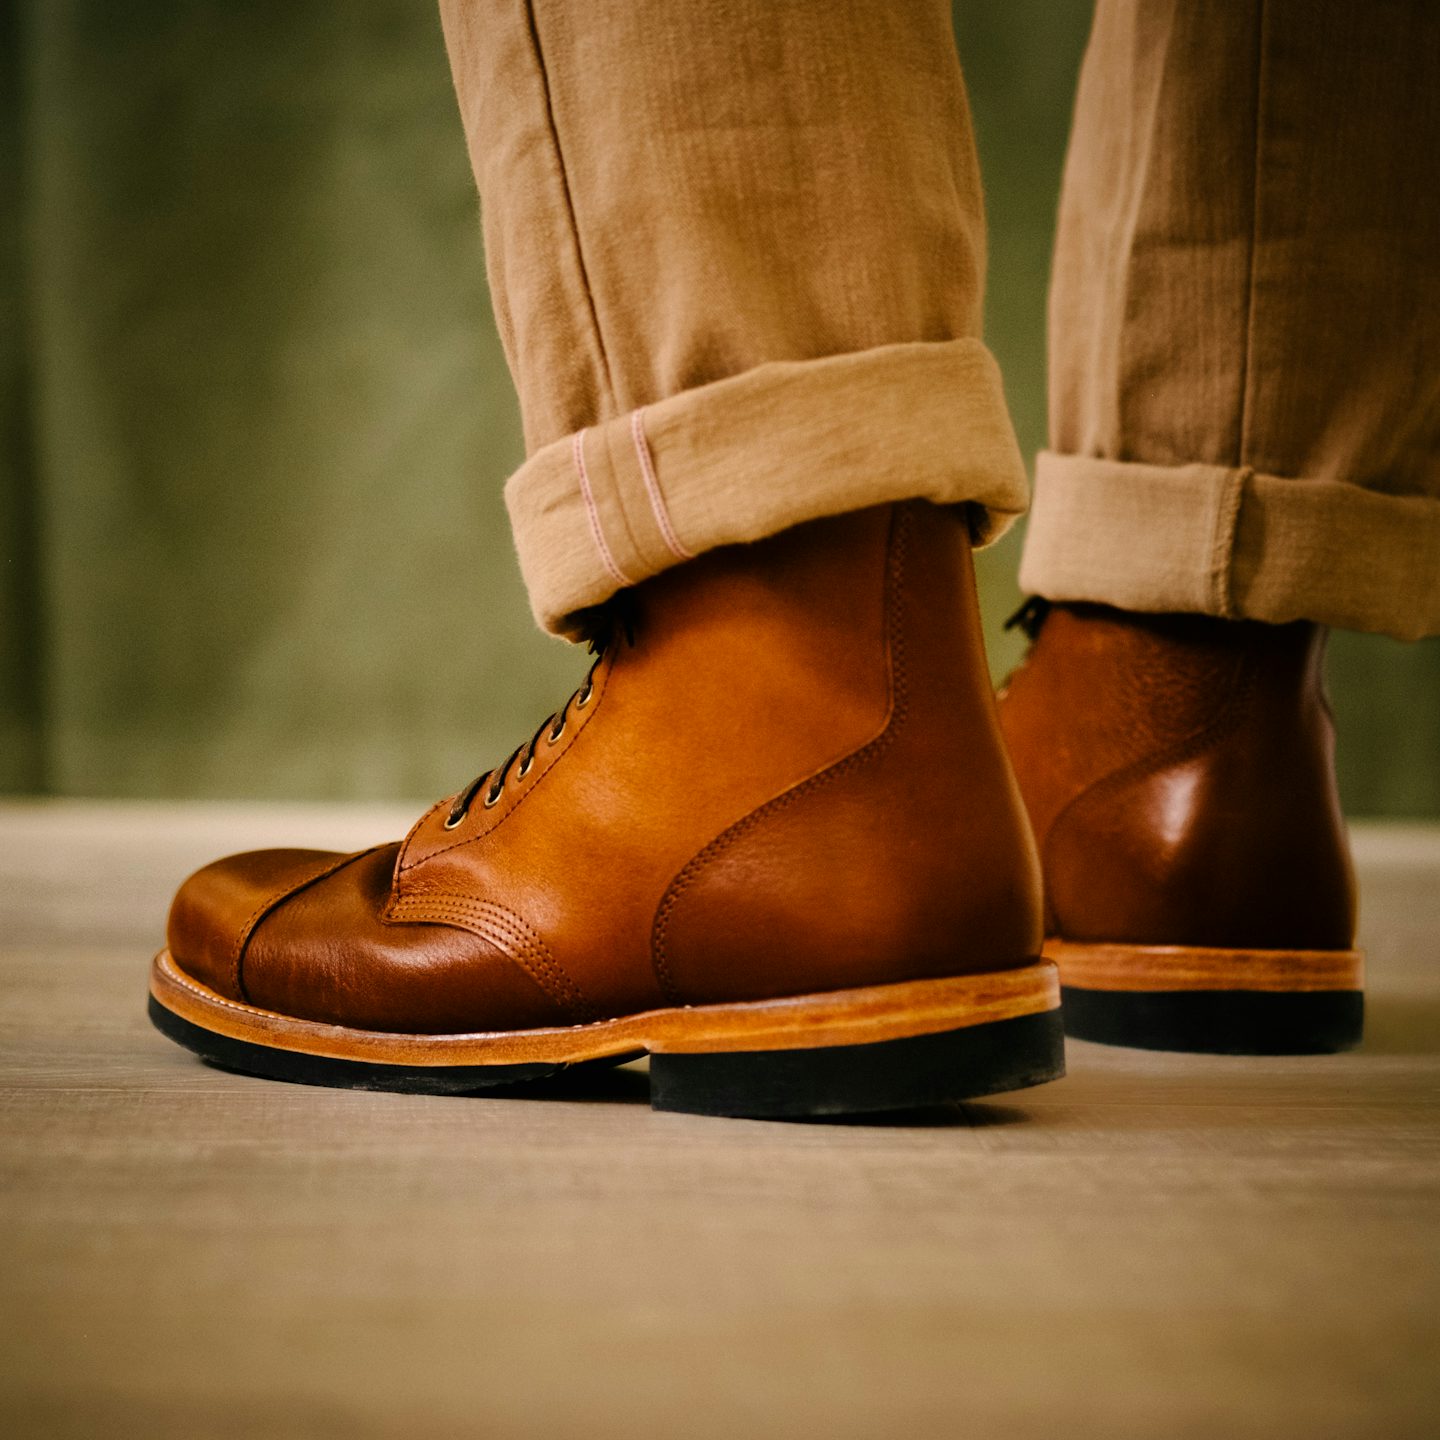 Whisky Classic Calf Cap-Toe Field Boot - Detail Image One